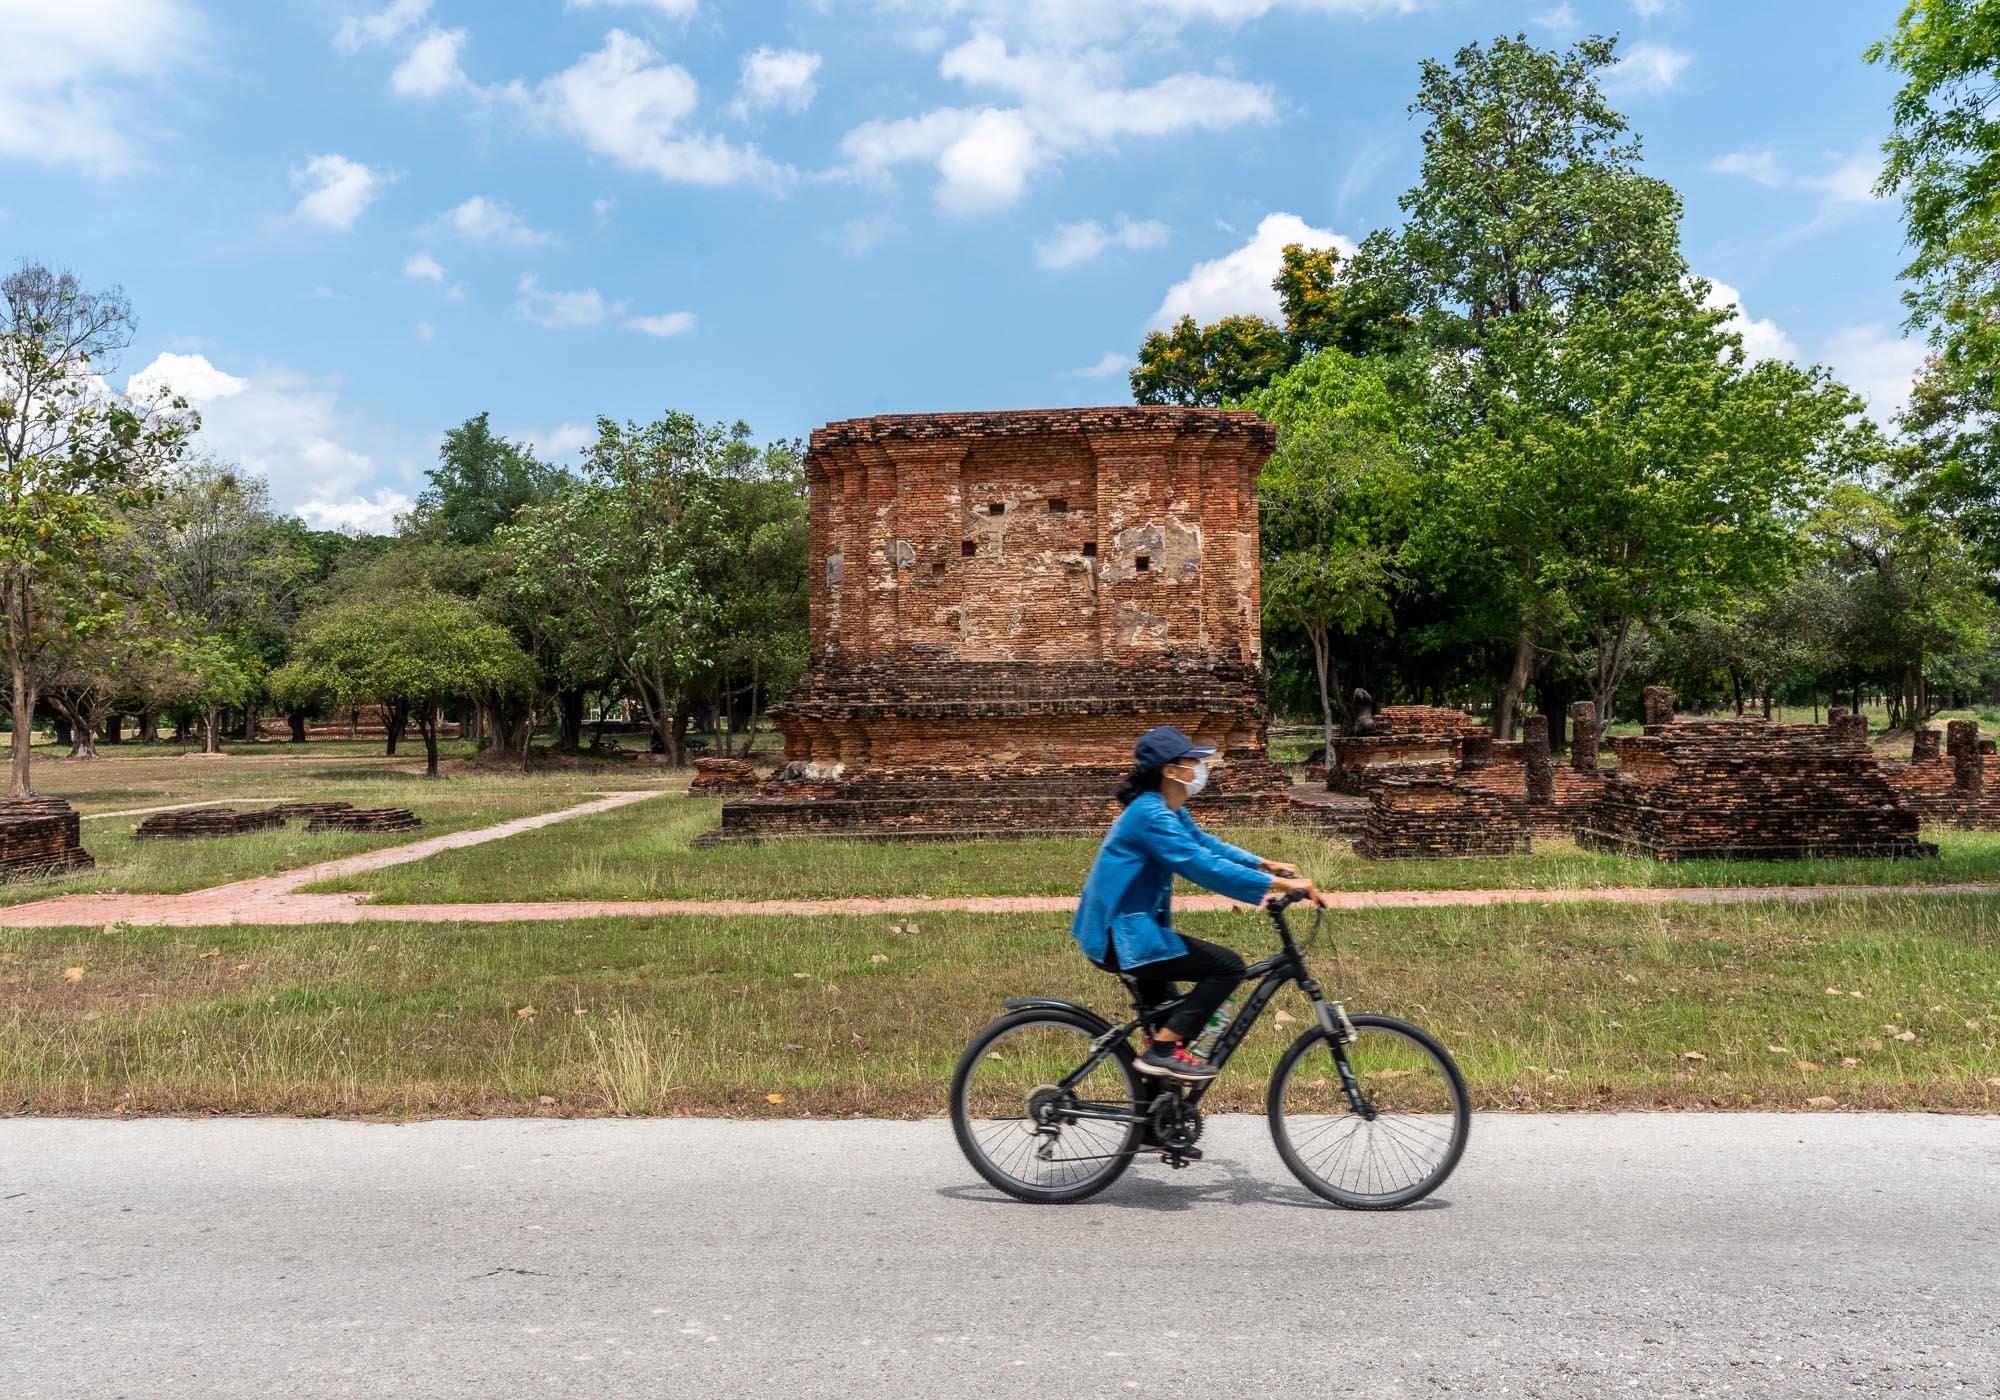 One of the smaller temple ruins in the West Zone of the Sukhothai Historical Park. – © Michael Turtle